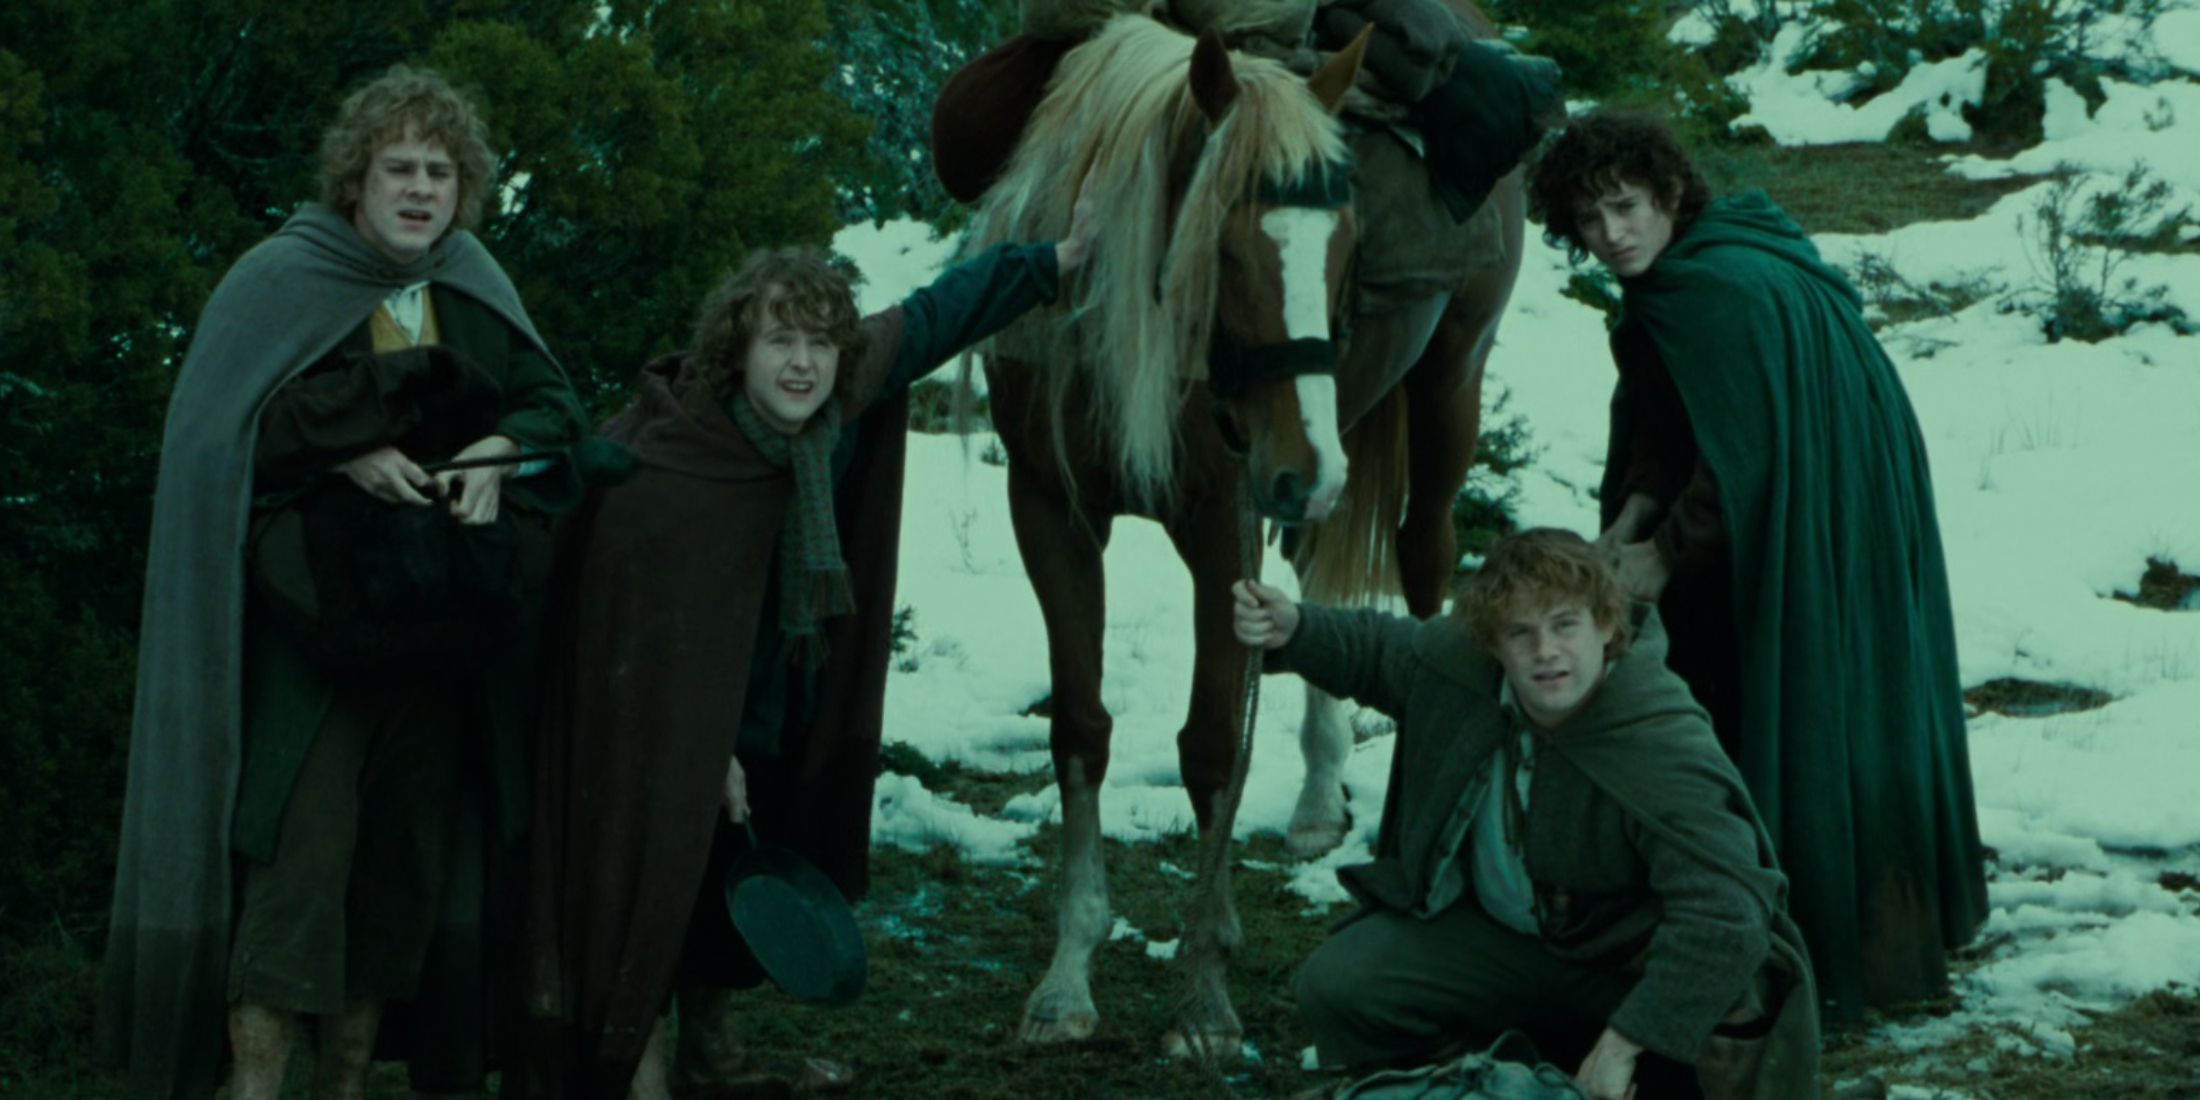 Merry, Pippin, Bill the Pony, Sam, and Frodo in The Lord of the Rings: The Fellowship of the Ring